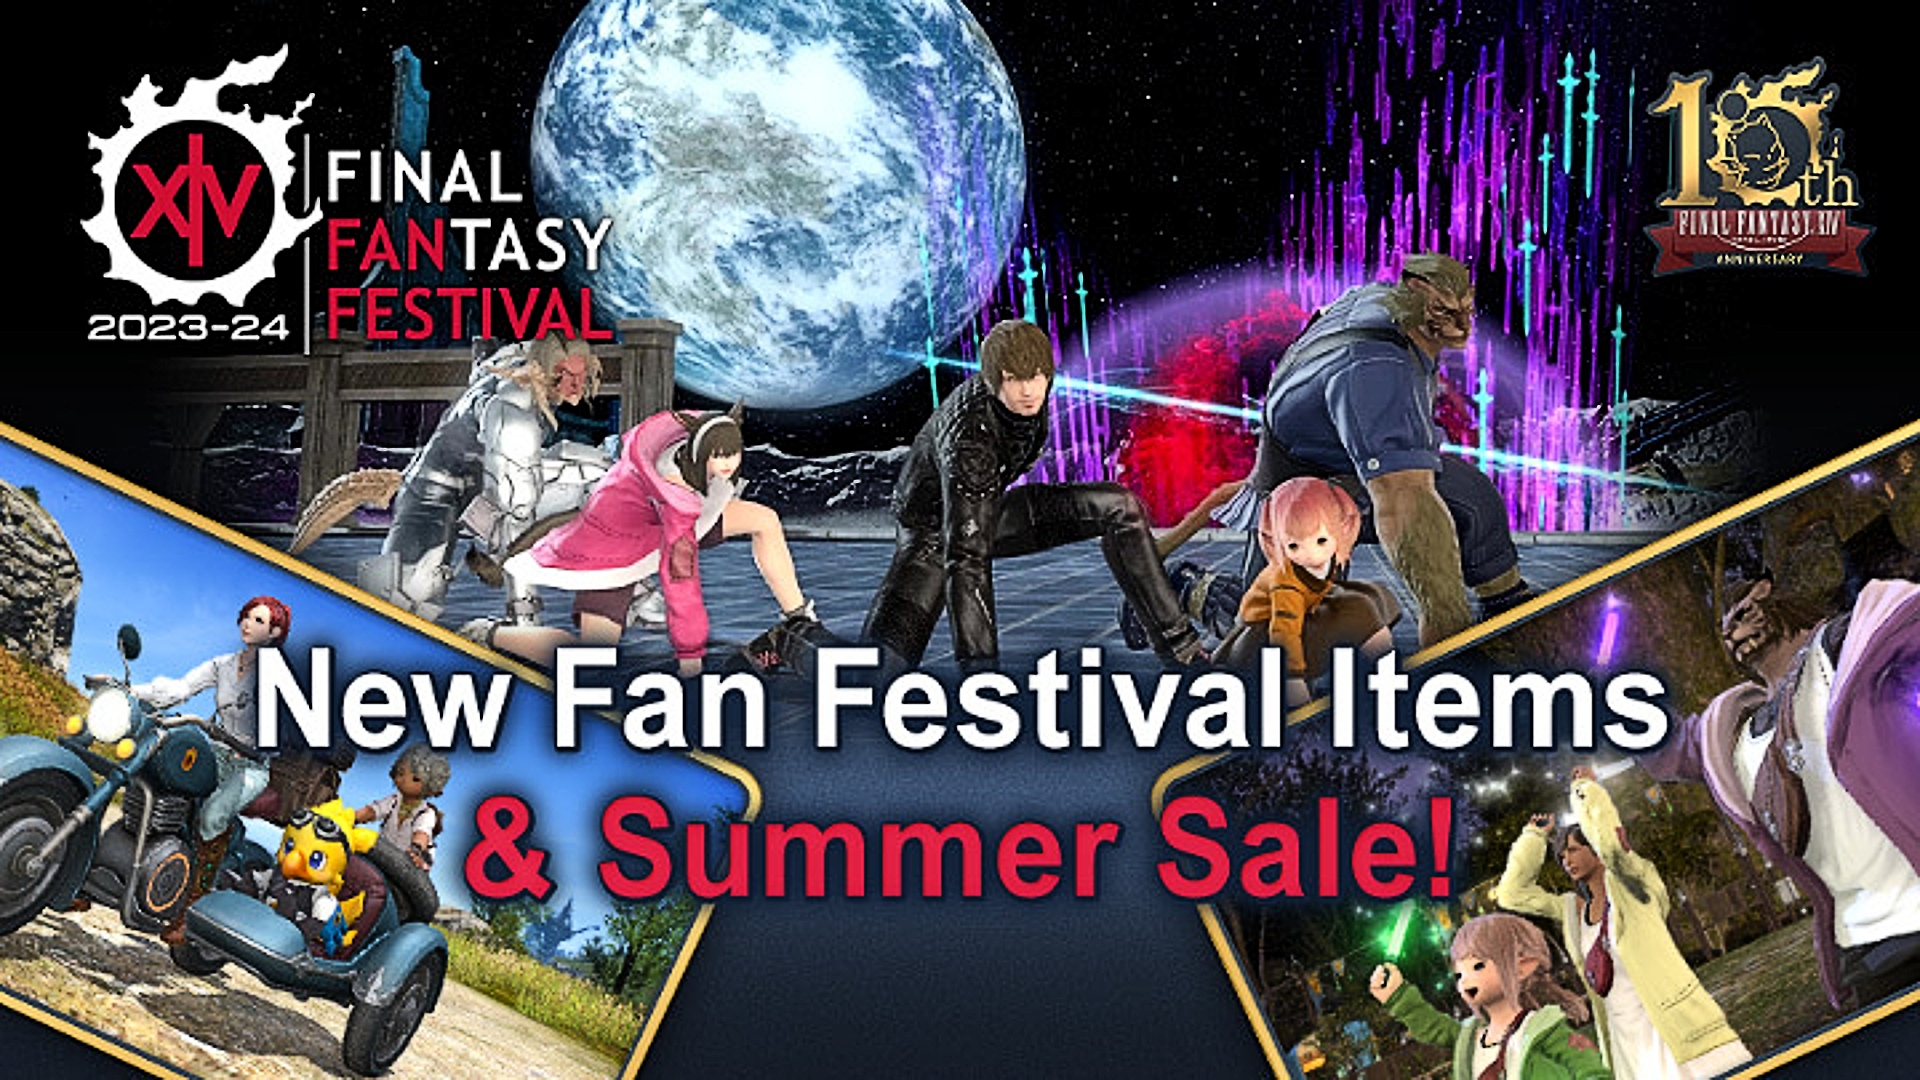 An FFXIV advertisement showing off the new Fan Festival-themed optional items for purchase